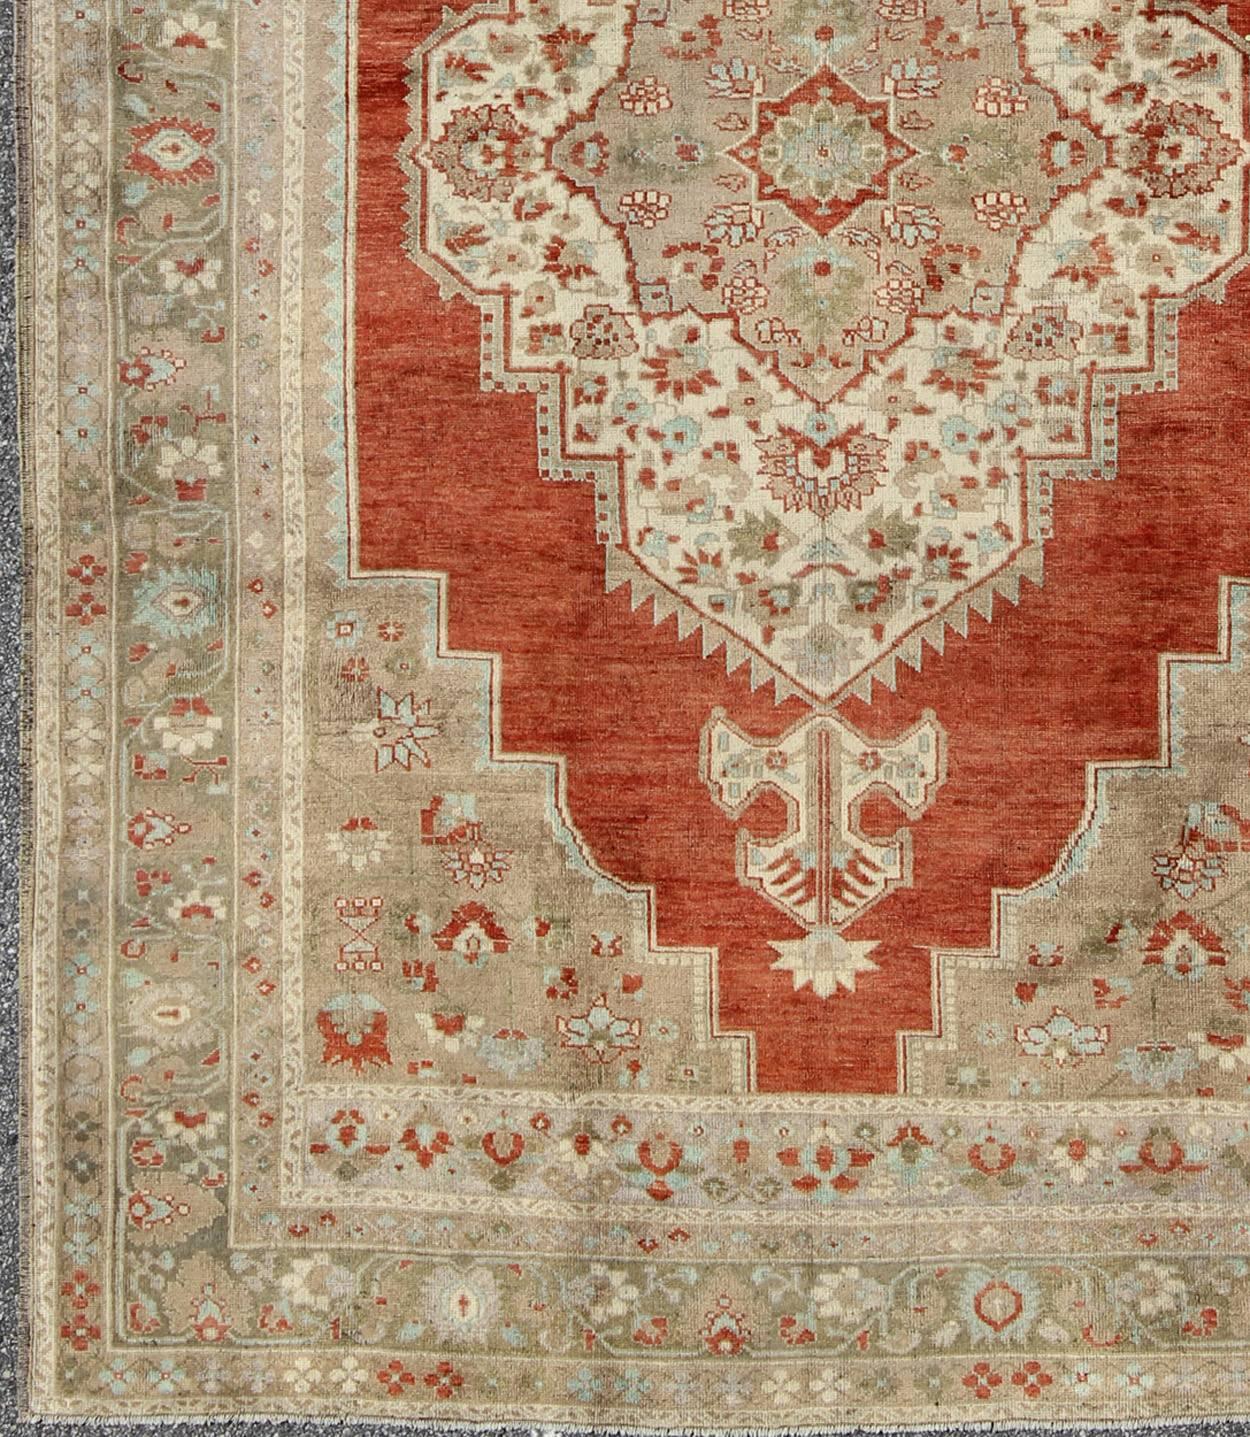 This beautiful classic vintage Oushak has a large medallion in rust/orange red complemented by light green border and warm taupe and cream colors. The medallion is enclosed by a complementary bored, making this rug quite well suited for traditional,